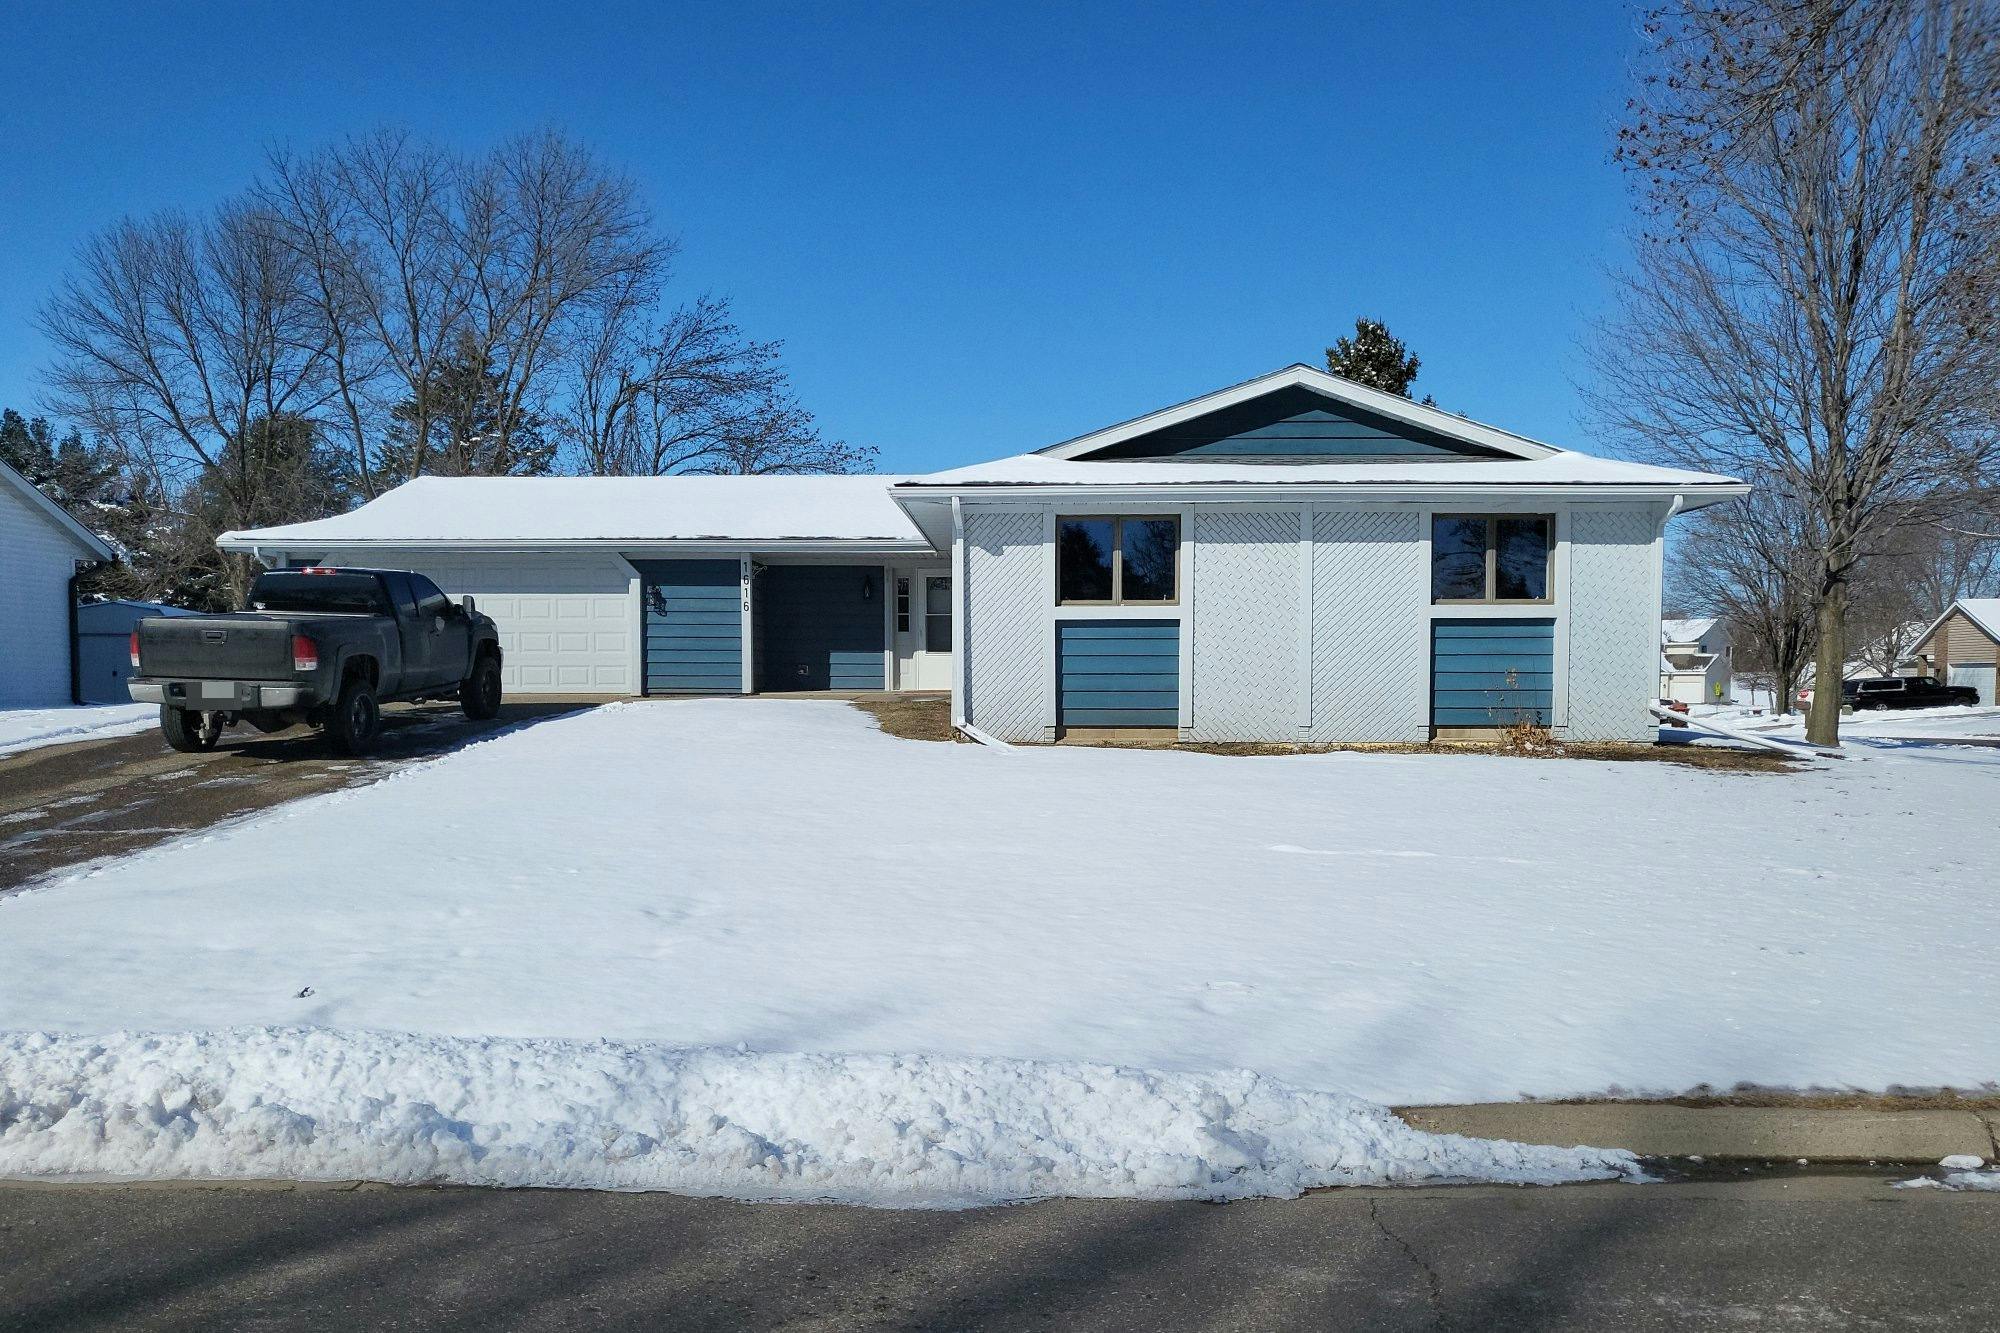 Todd Ct, Hastings, MN 55033